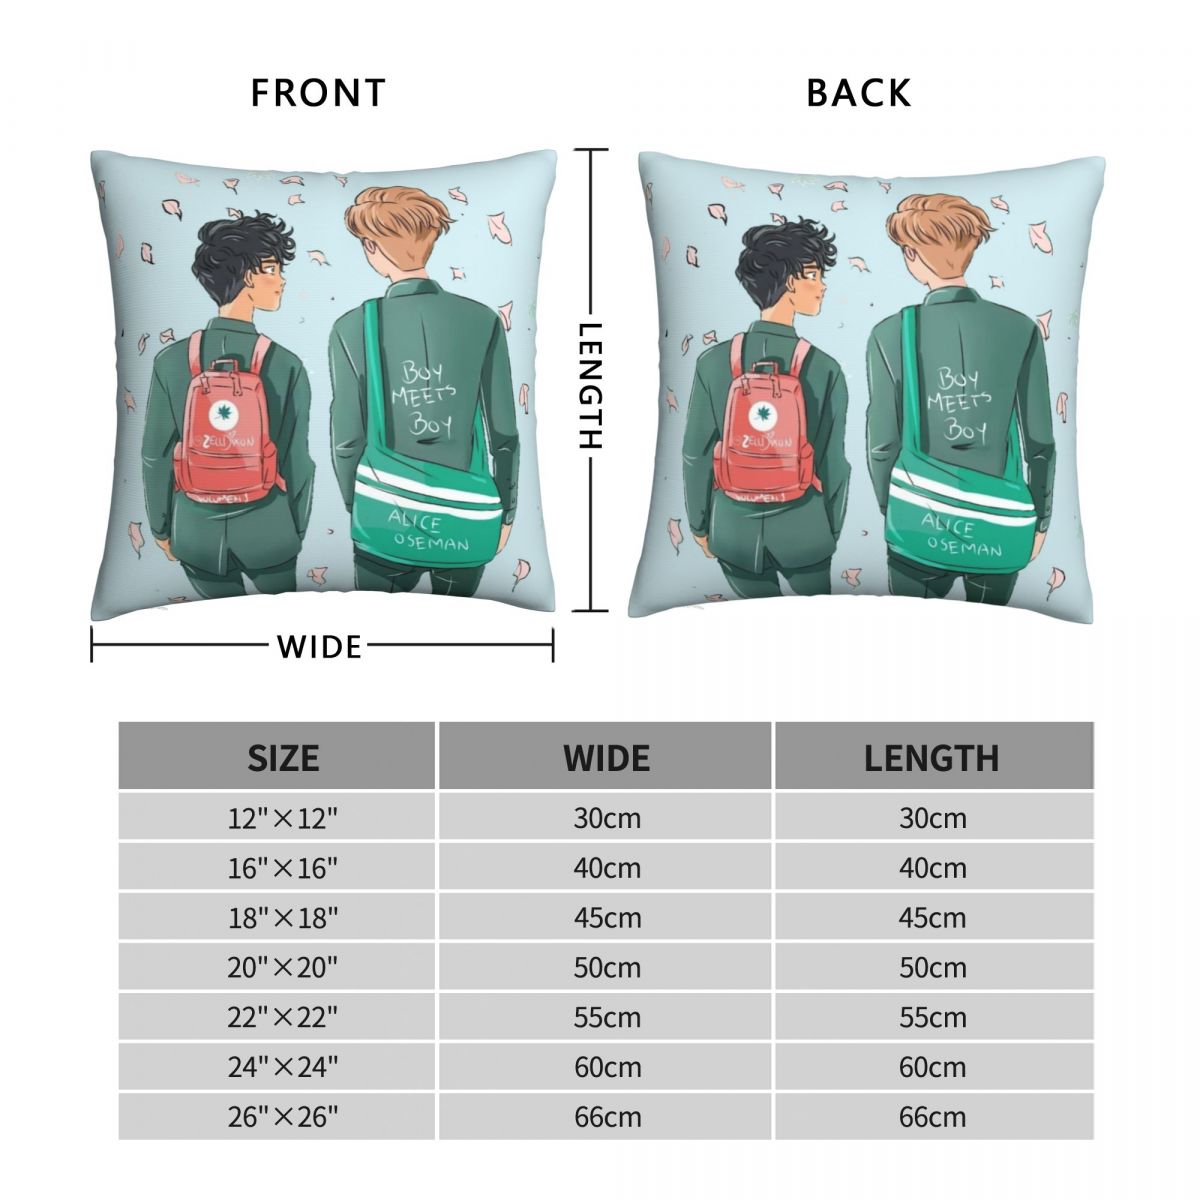 Heartstopper Duo Pillow Case Polyester Decorative Pillow Heartstopper Kit Connor Oseman Charlie Nick Boys Love Casual Pillowcase